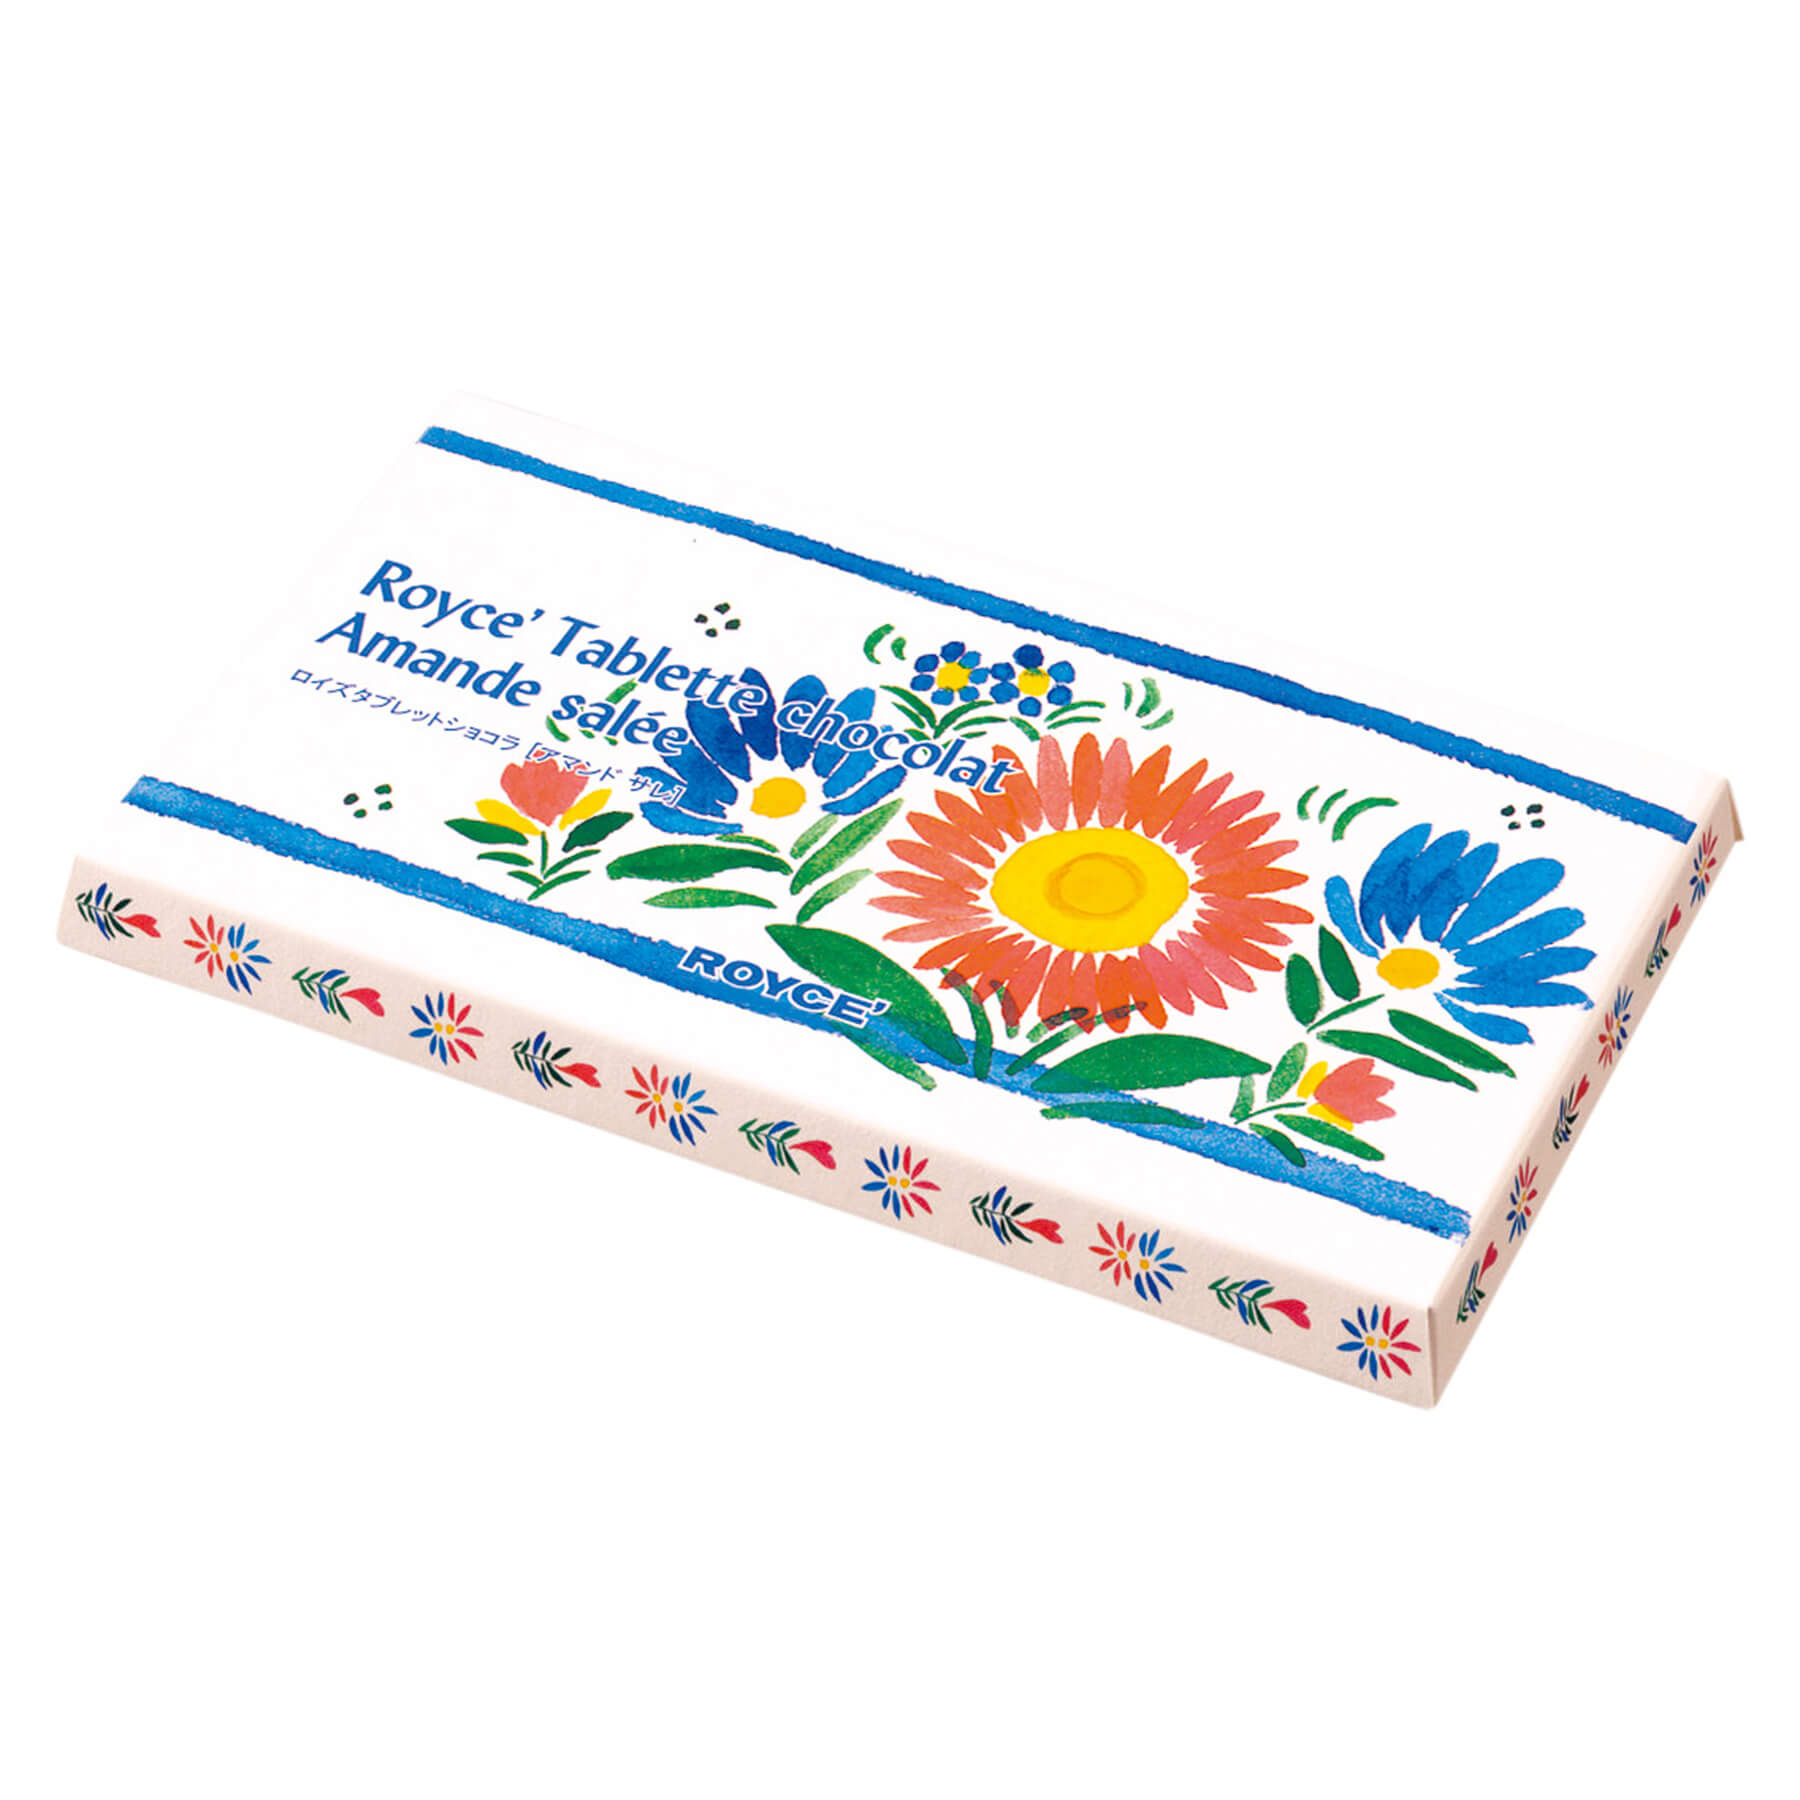 ROYCE' Chocolate - ROYCE' Tablette Chocolat "Amande Salée" - Image shows a rectangular chocolate bar box with prints of flowers and leaves in blue, green, yellow, and red.  Text says ROYCE' Tablette Chocolat Amande Salée. ROYCE'.